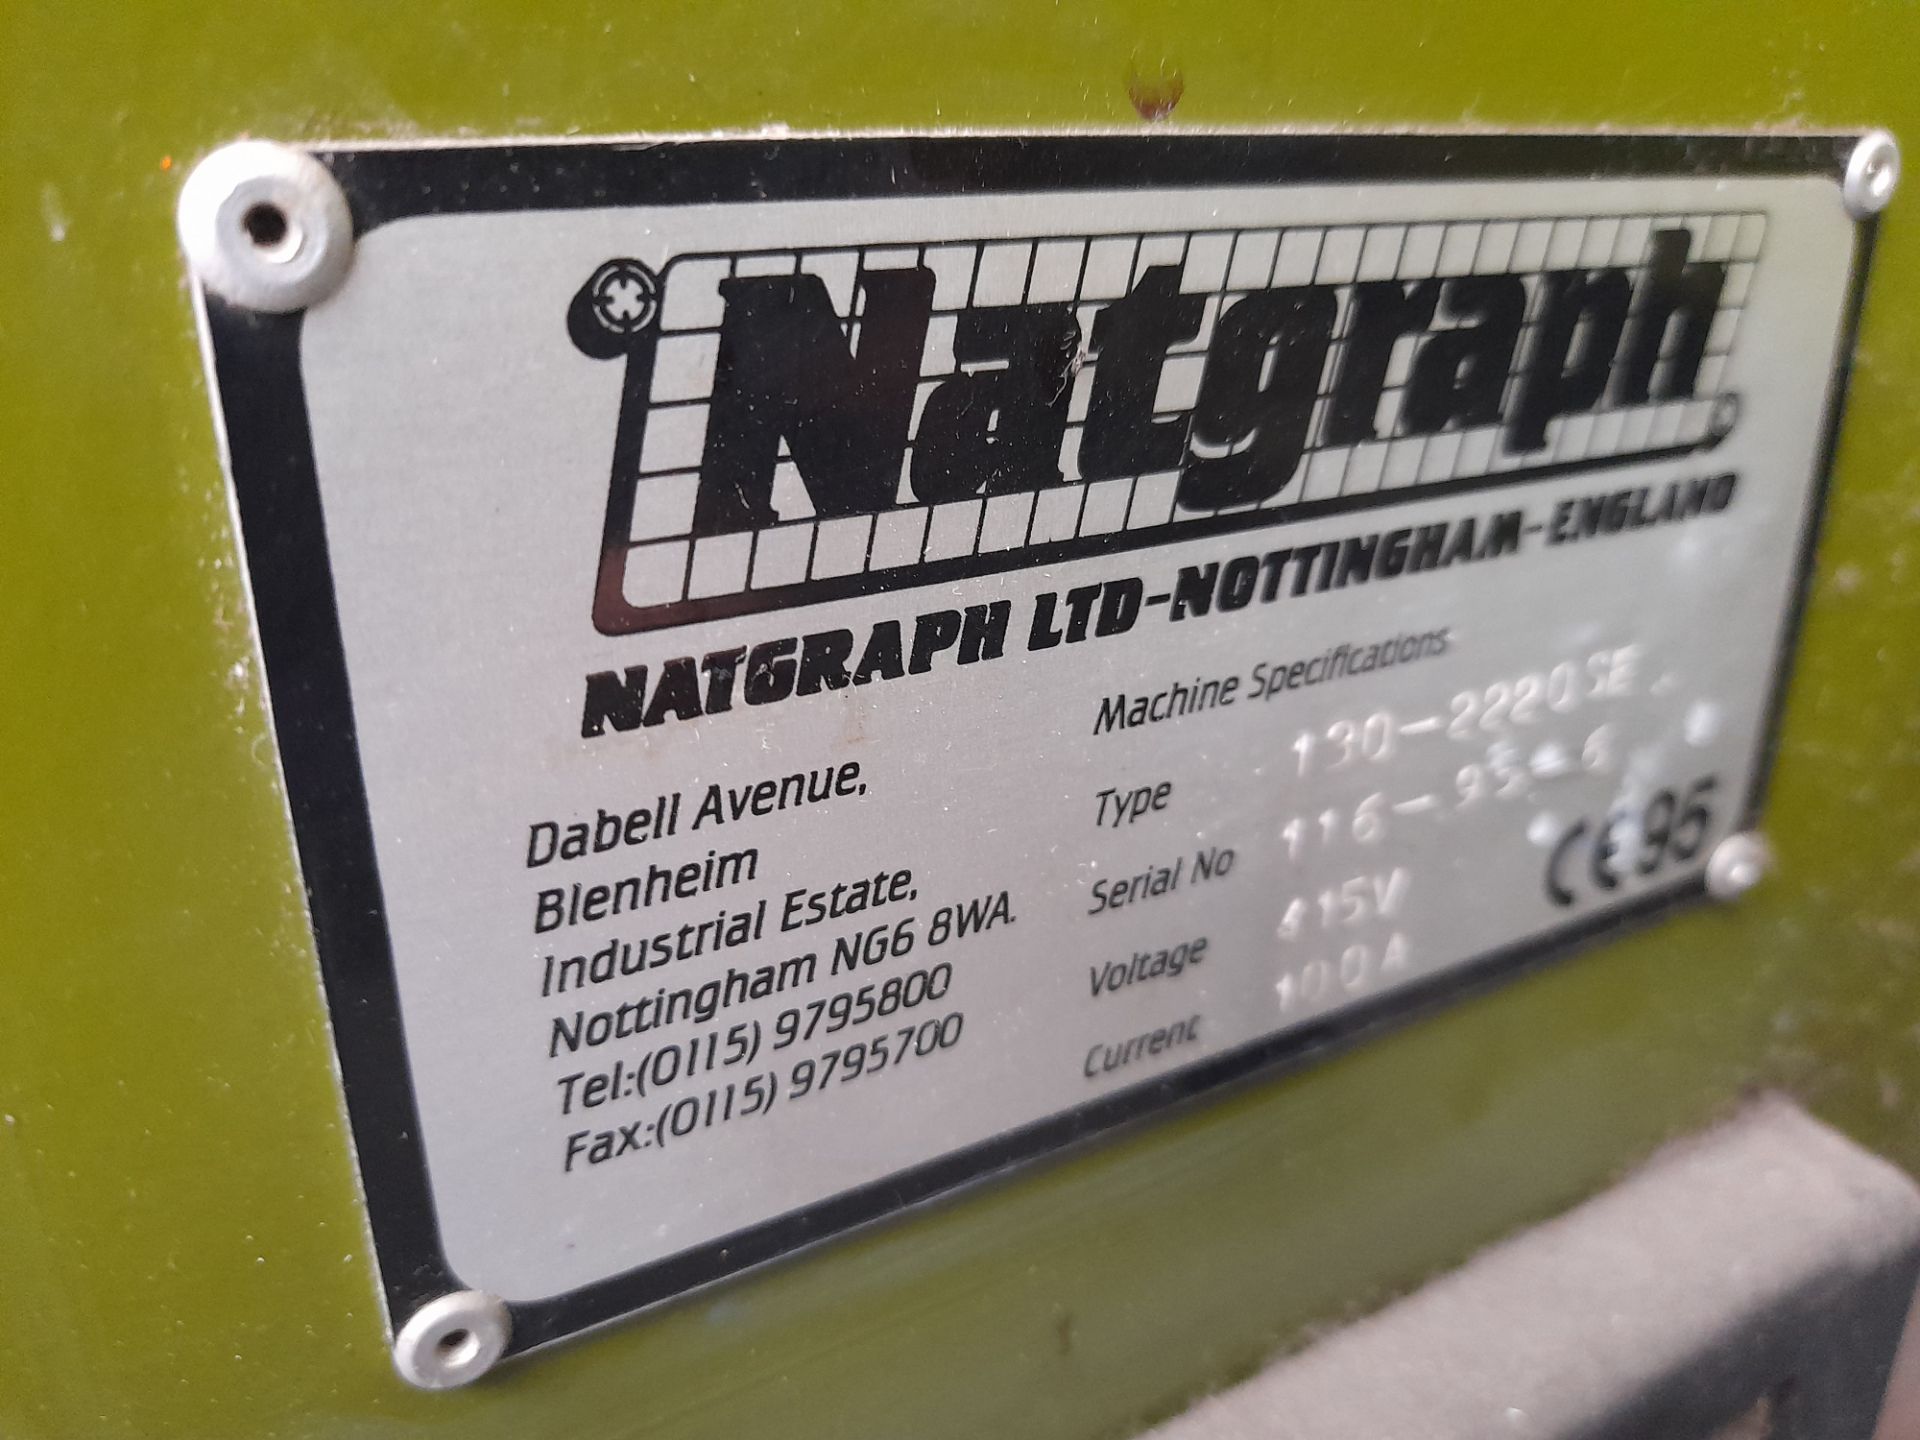 Natgraph Air Force type 130-2220SE Combined Air/UV Dryer, serial number 116-95-6, lamp hours 539 - Image 5 of 7